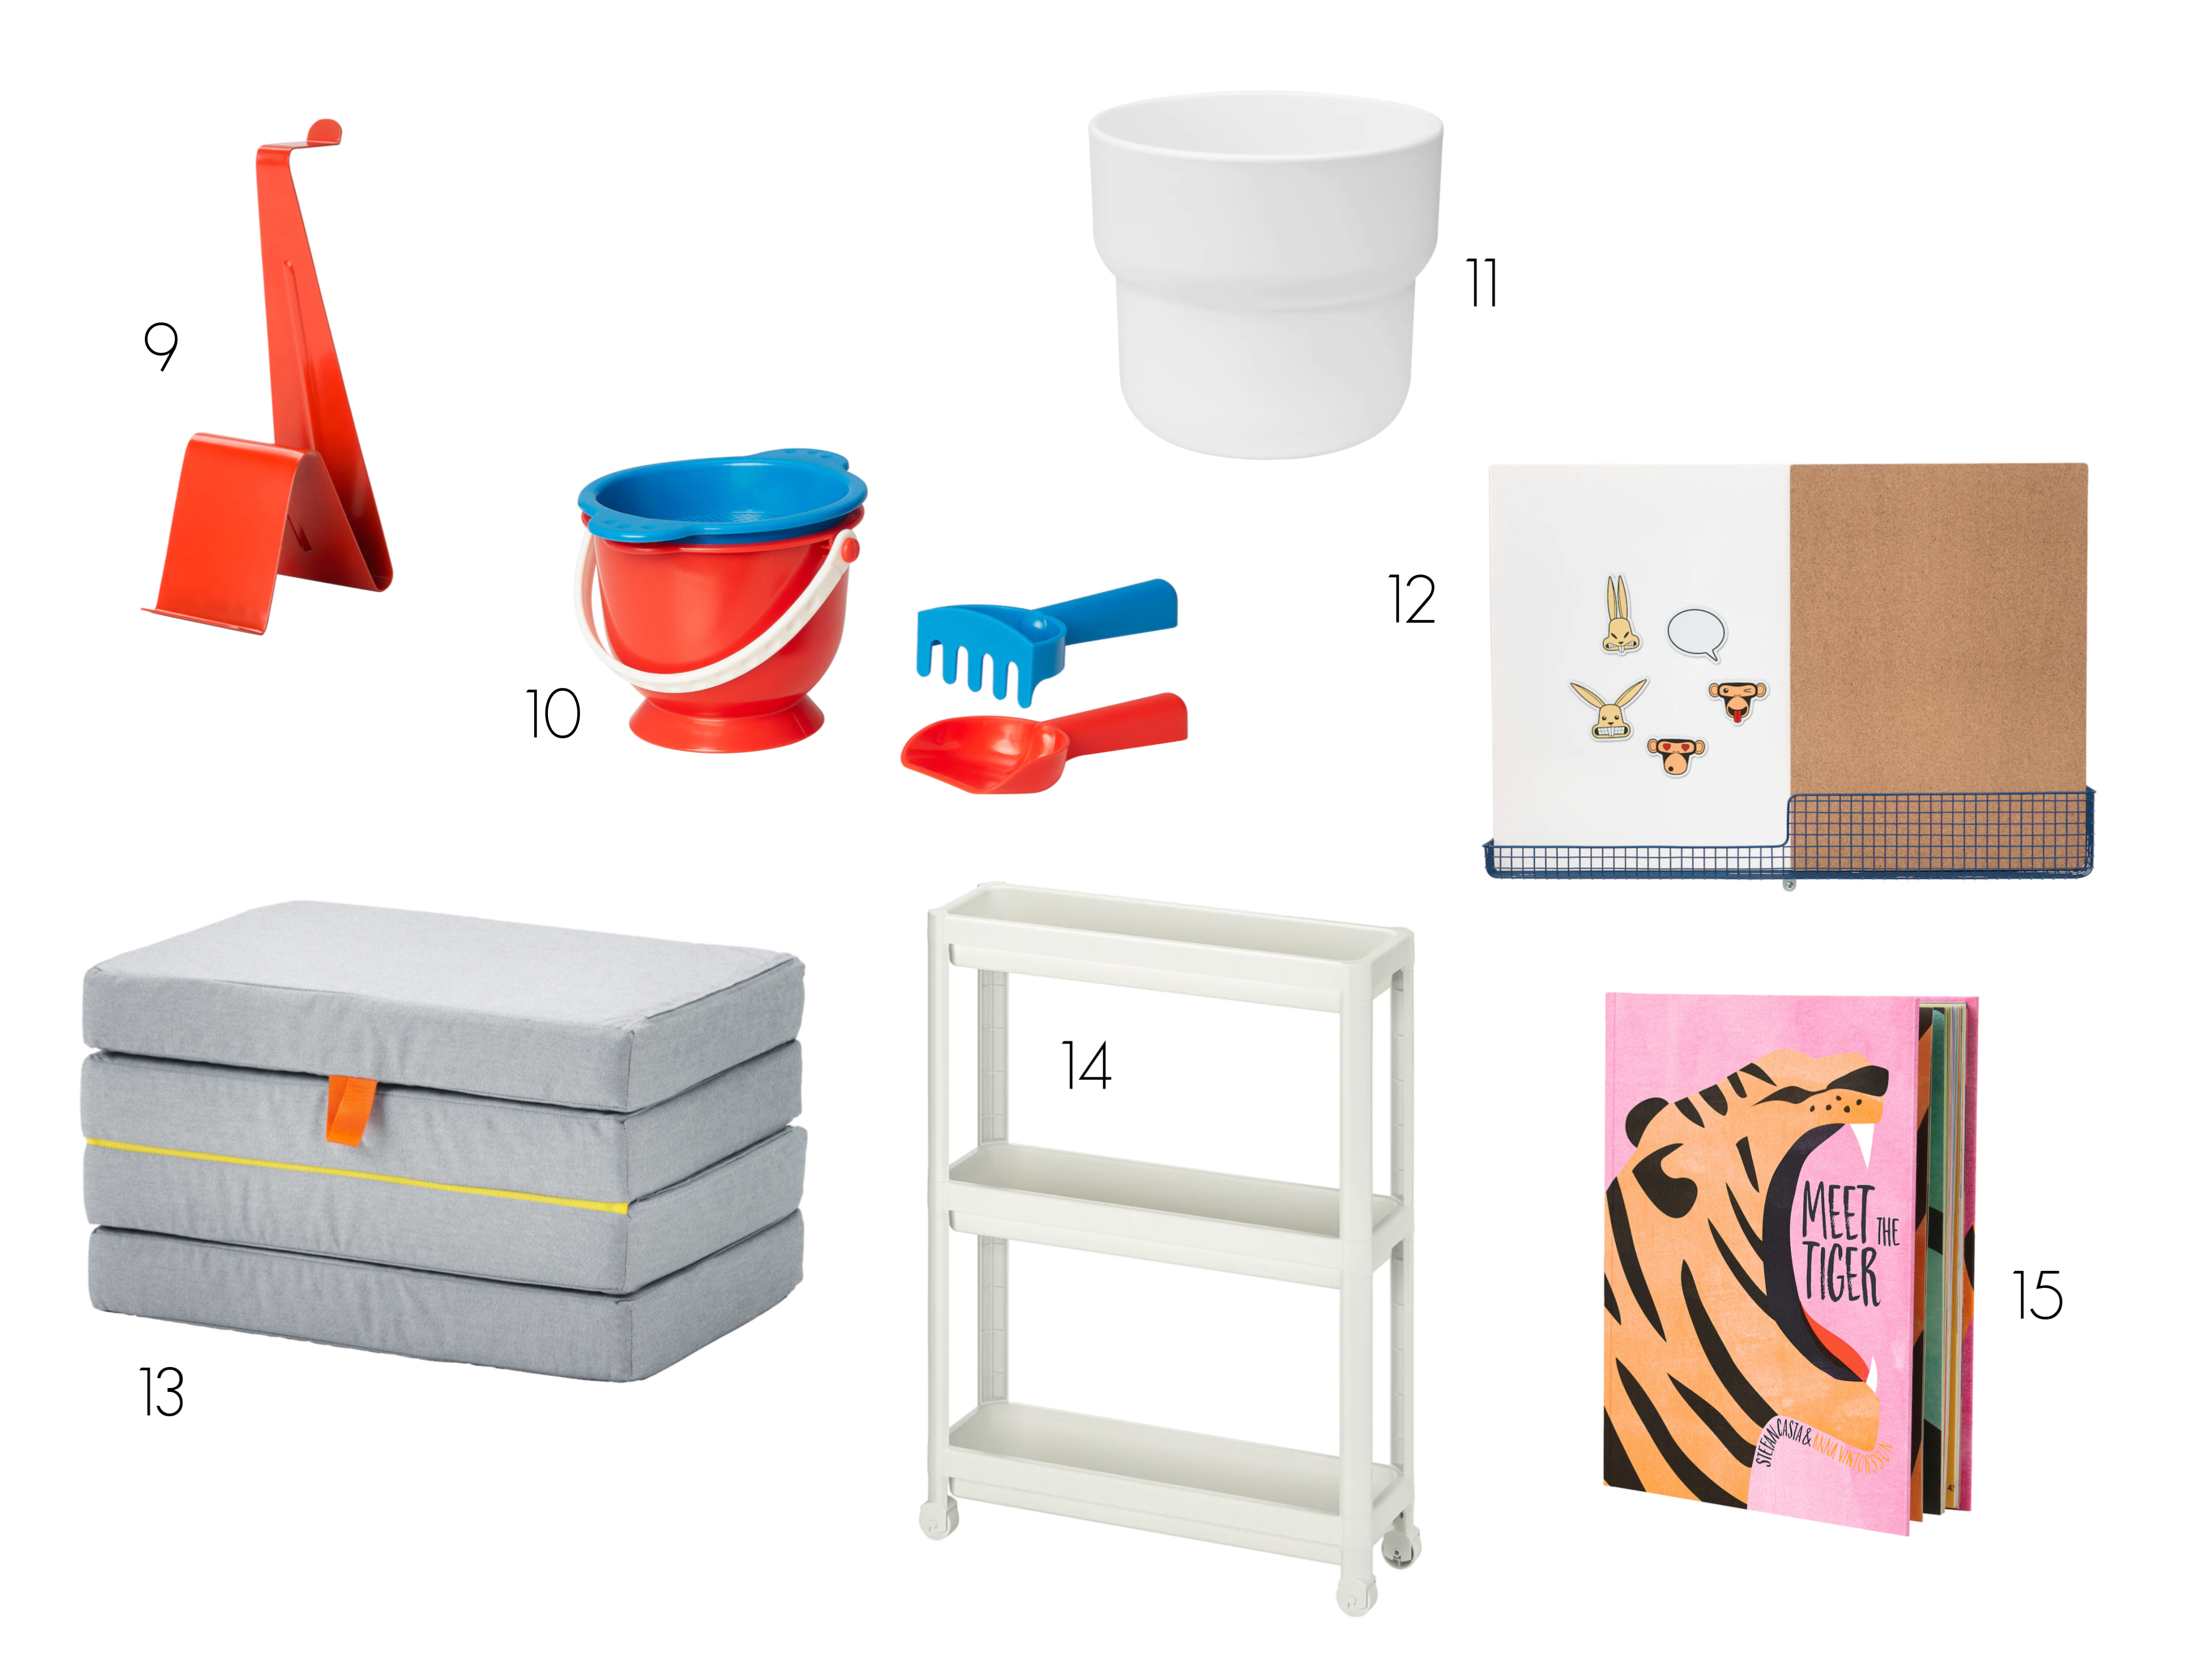 Montessori friendly finds for children and homes from IKEA.